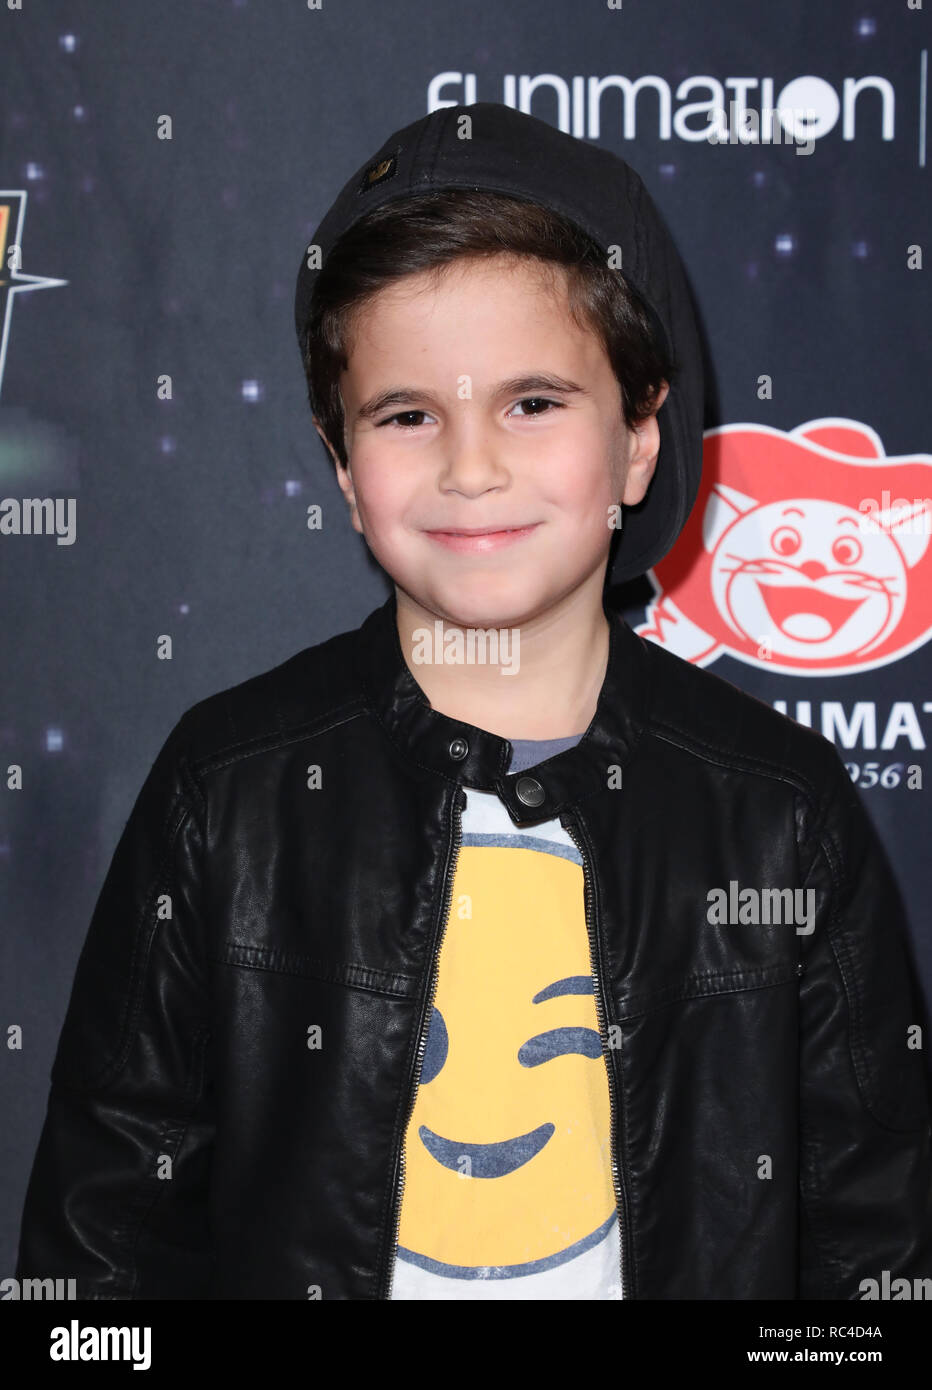 Funimation Films' 'Dragon Ball Super: Broly' Movie Premiere held at the TCL Chinese Theatre in Los Angeles, California on December 13, 2018  Featuring: Tyler Wladis Where: Los Angeles, California, United States When: 13 Dec 2018 Credit: Sheri Determan/WENN.com Stock Photo